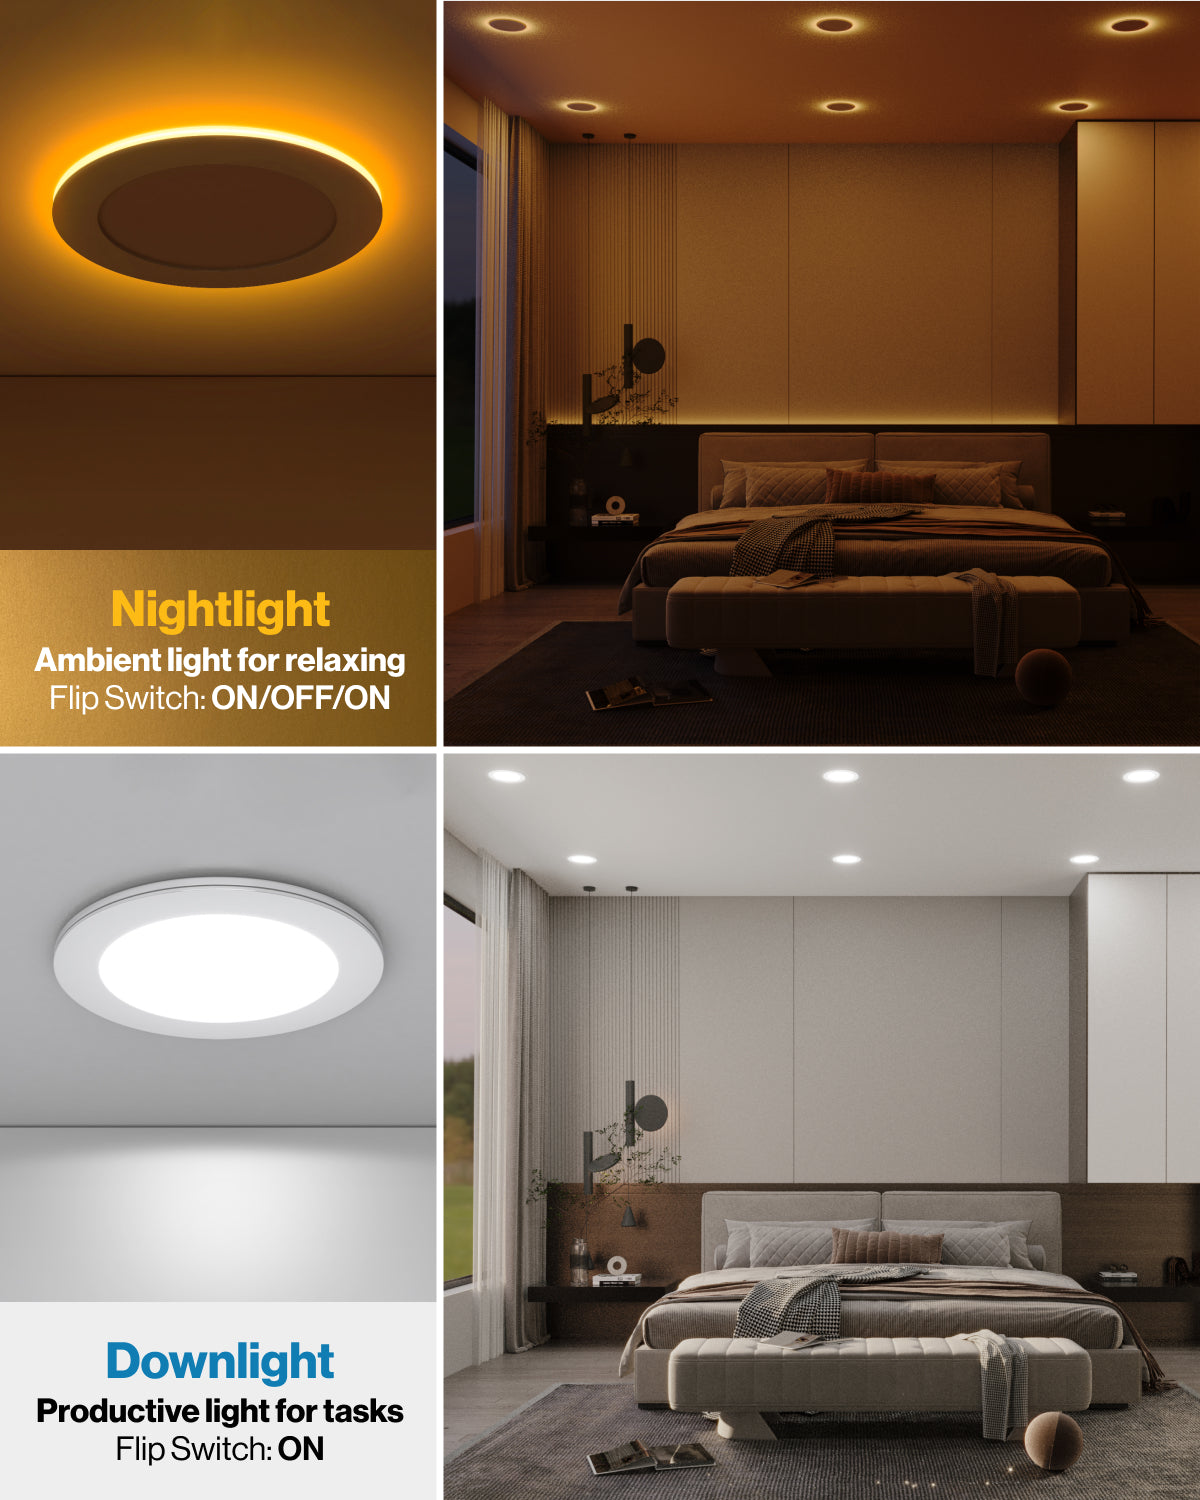 Selectable dimming capabilities to fit any décor or mood for your indoor spaces.